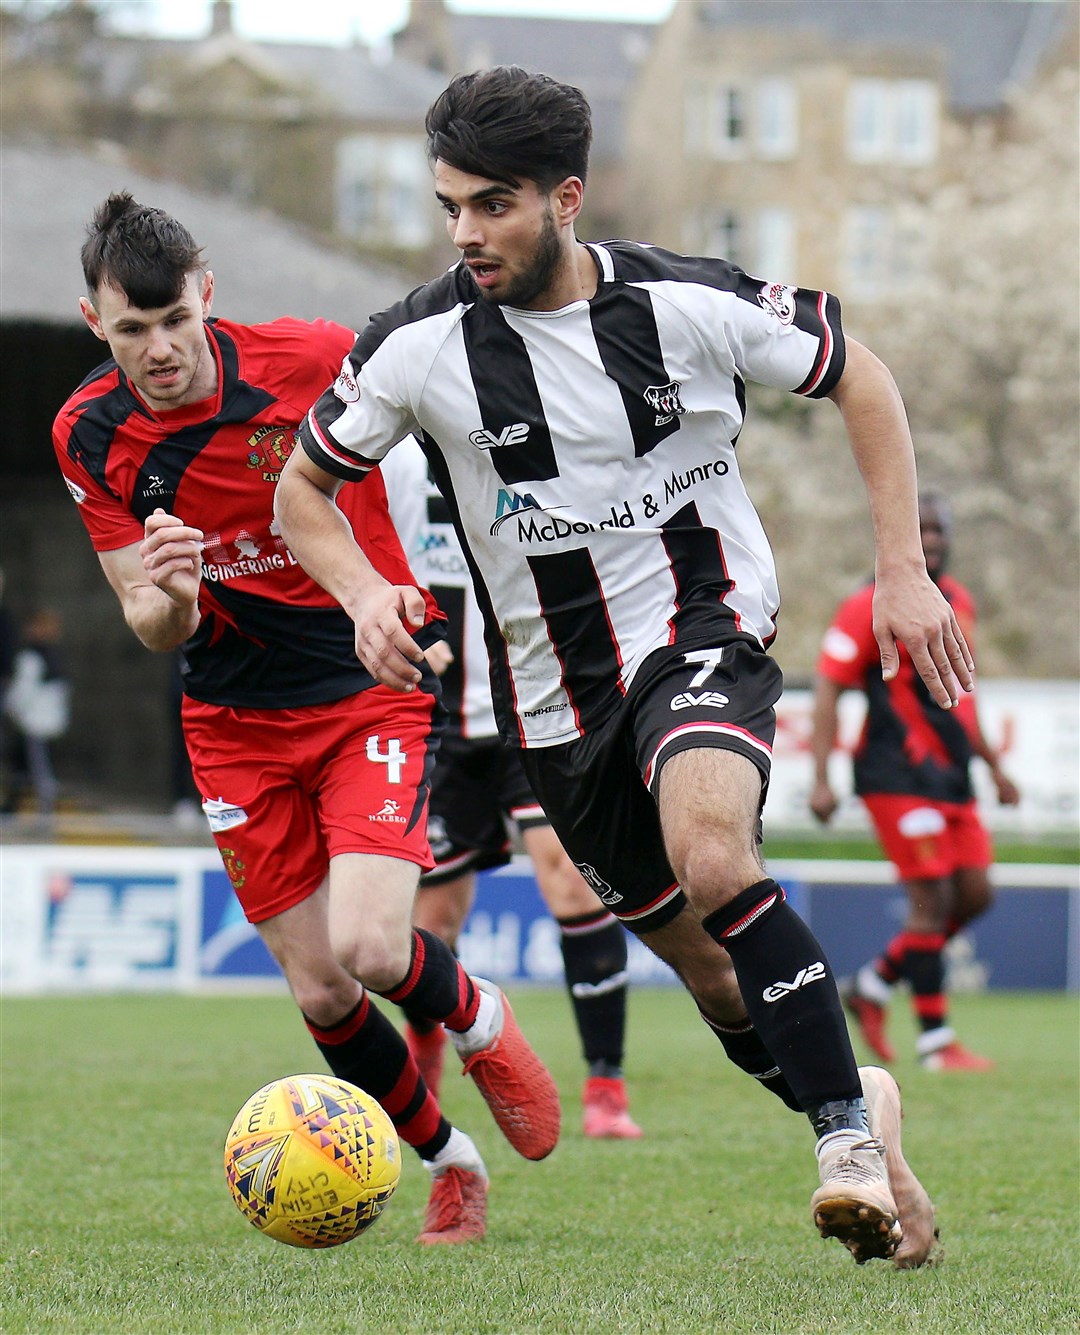 Rabin Omar, pictured i action against former club Annan, will miss Elgin's next two games due to suspension. Photo: Bob Crombie